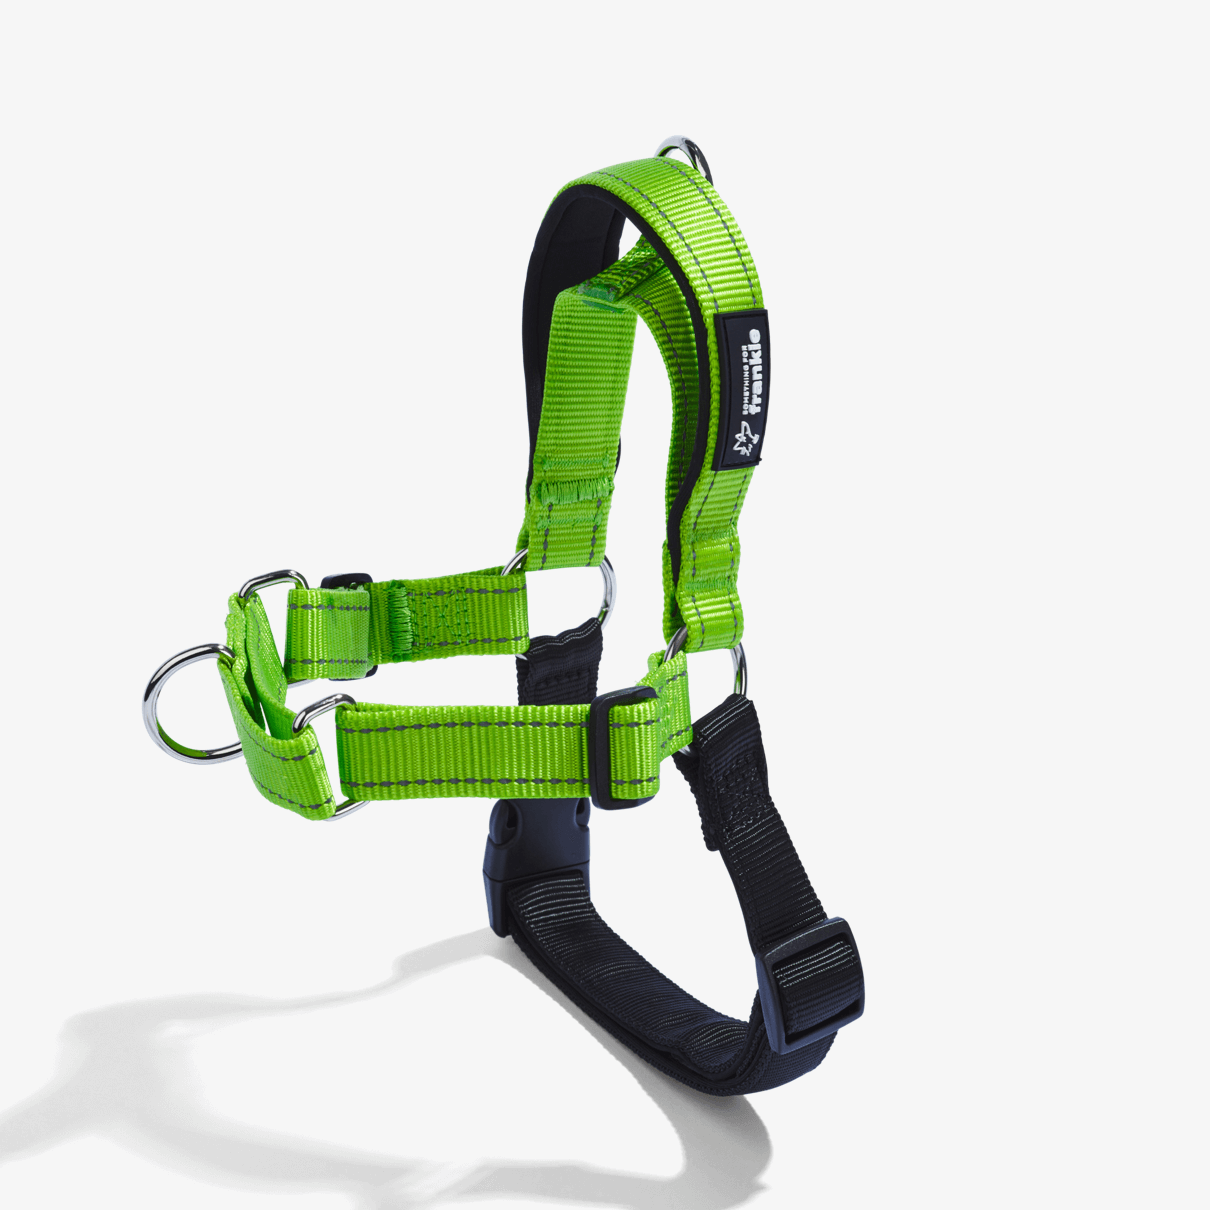 Stress-free walking with our proven No-pull Harness